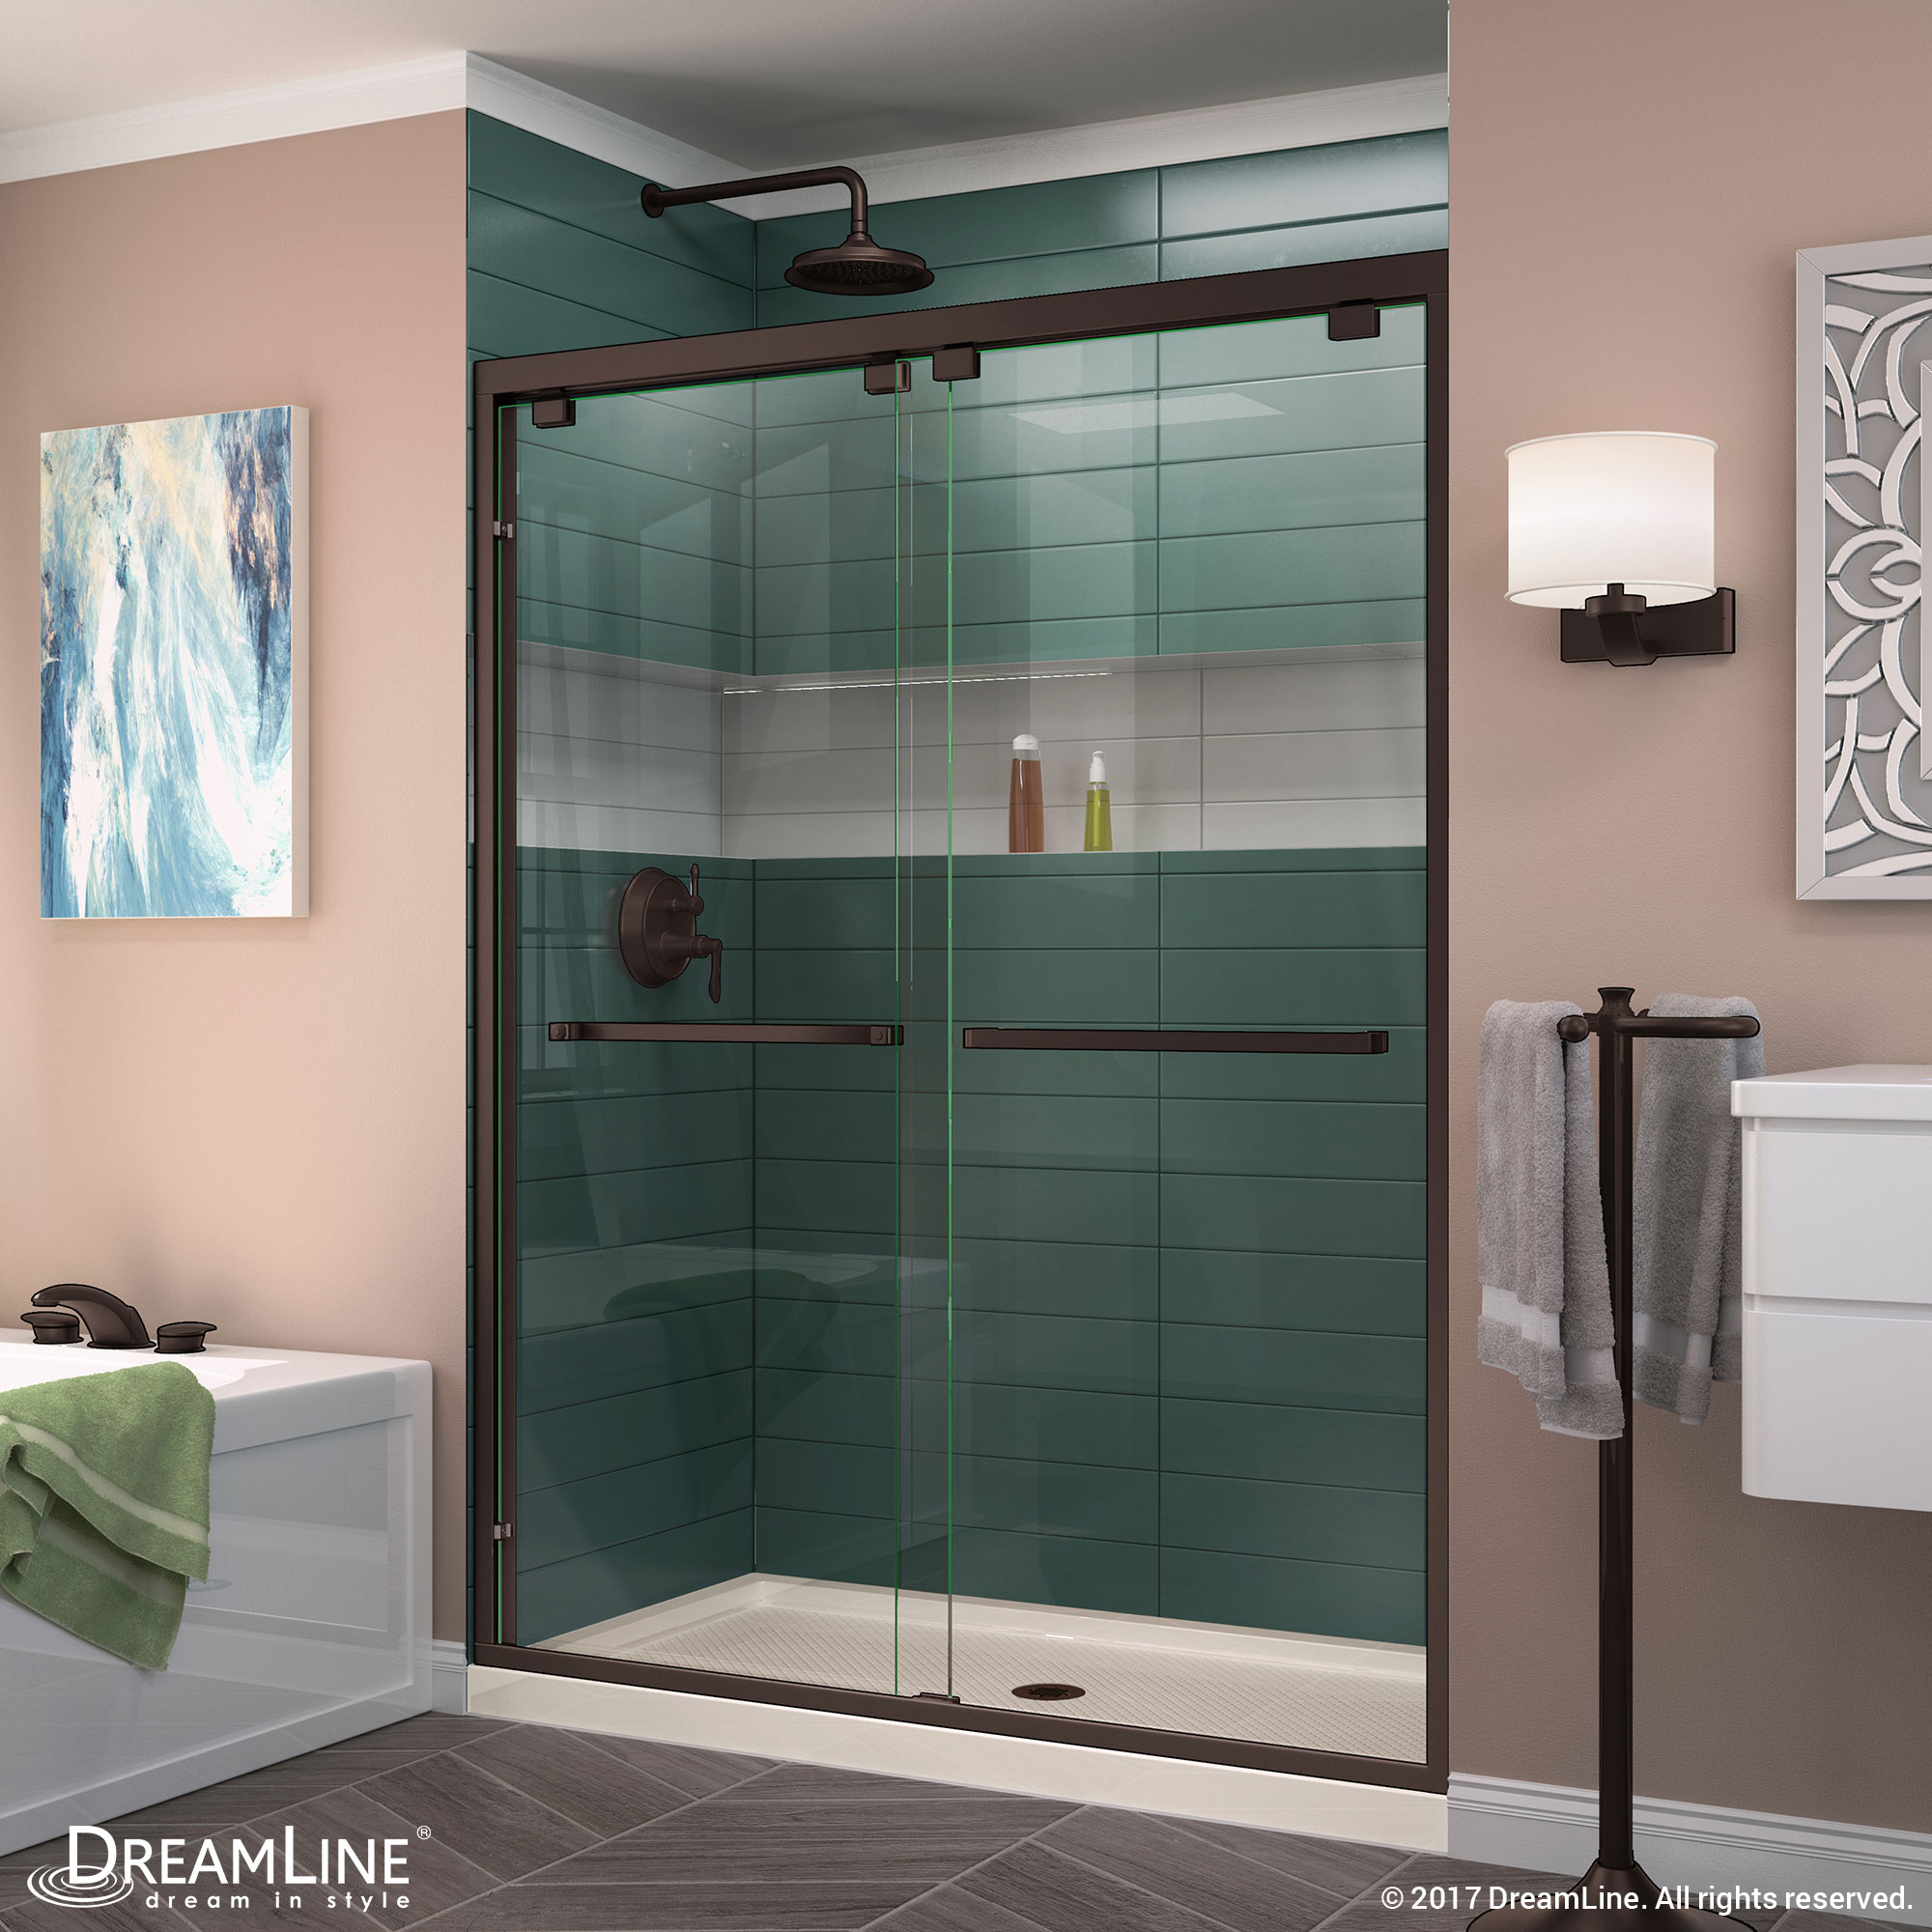 DreamLine Encore 32 in. D x 60 in. W x 78 3/4 in. H Bypass Shower Door in Brushed Nickel and Center Drain Biscuit Base Kit